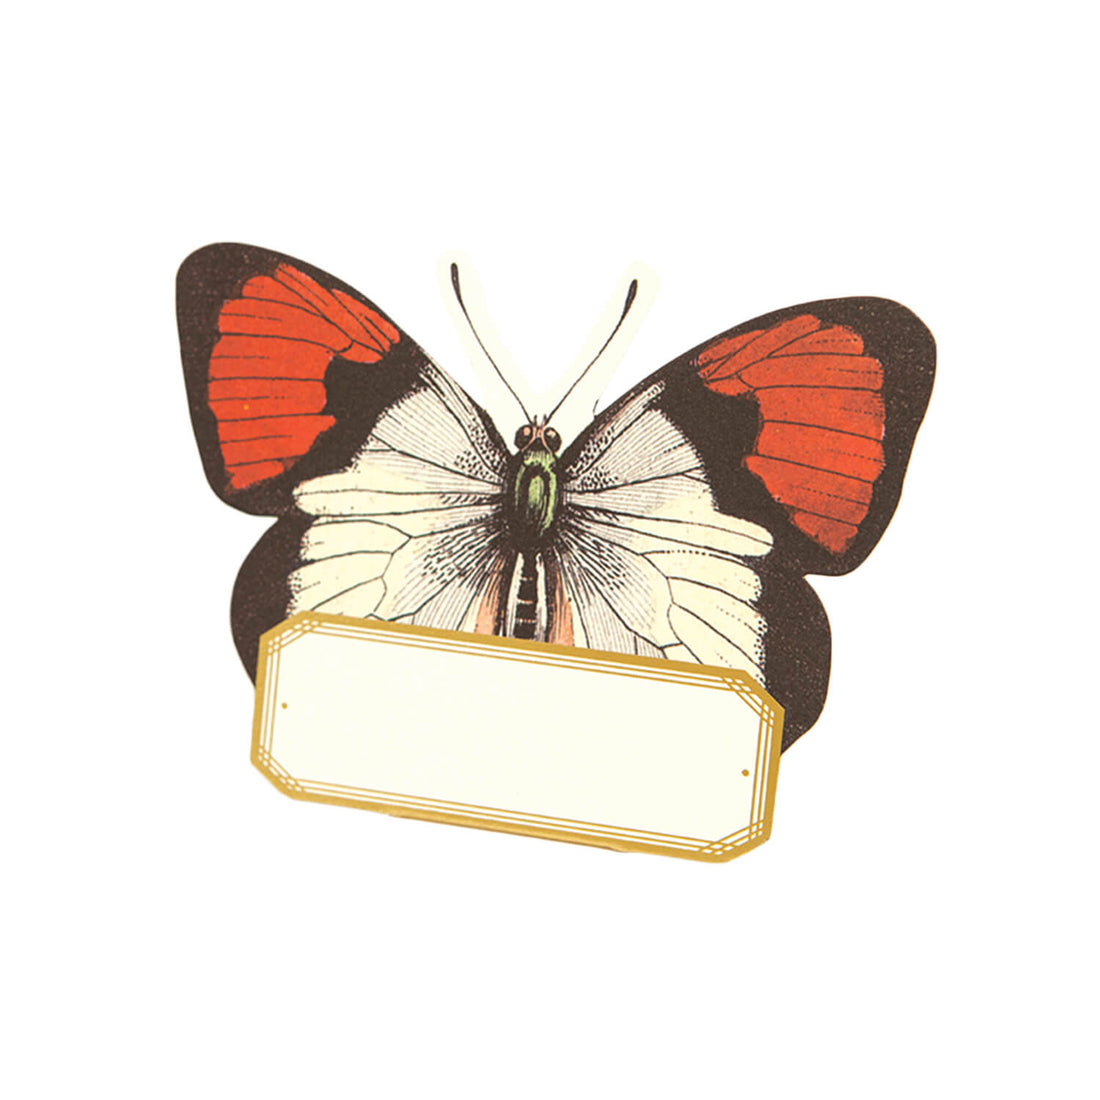 A die-cut, freestanding place card featuring a stunning red, white and black butterfly, with a white, rectangular, gold-framed open space at the bottom.